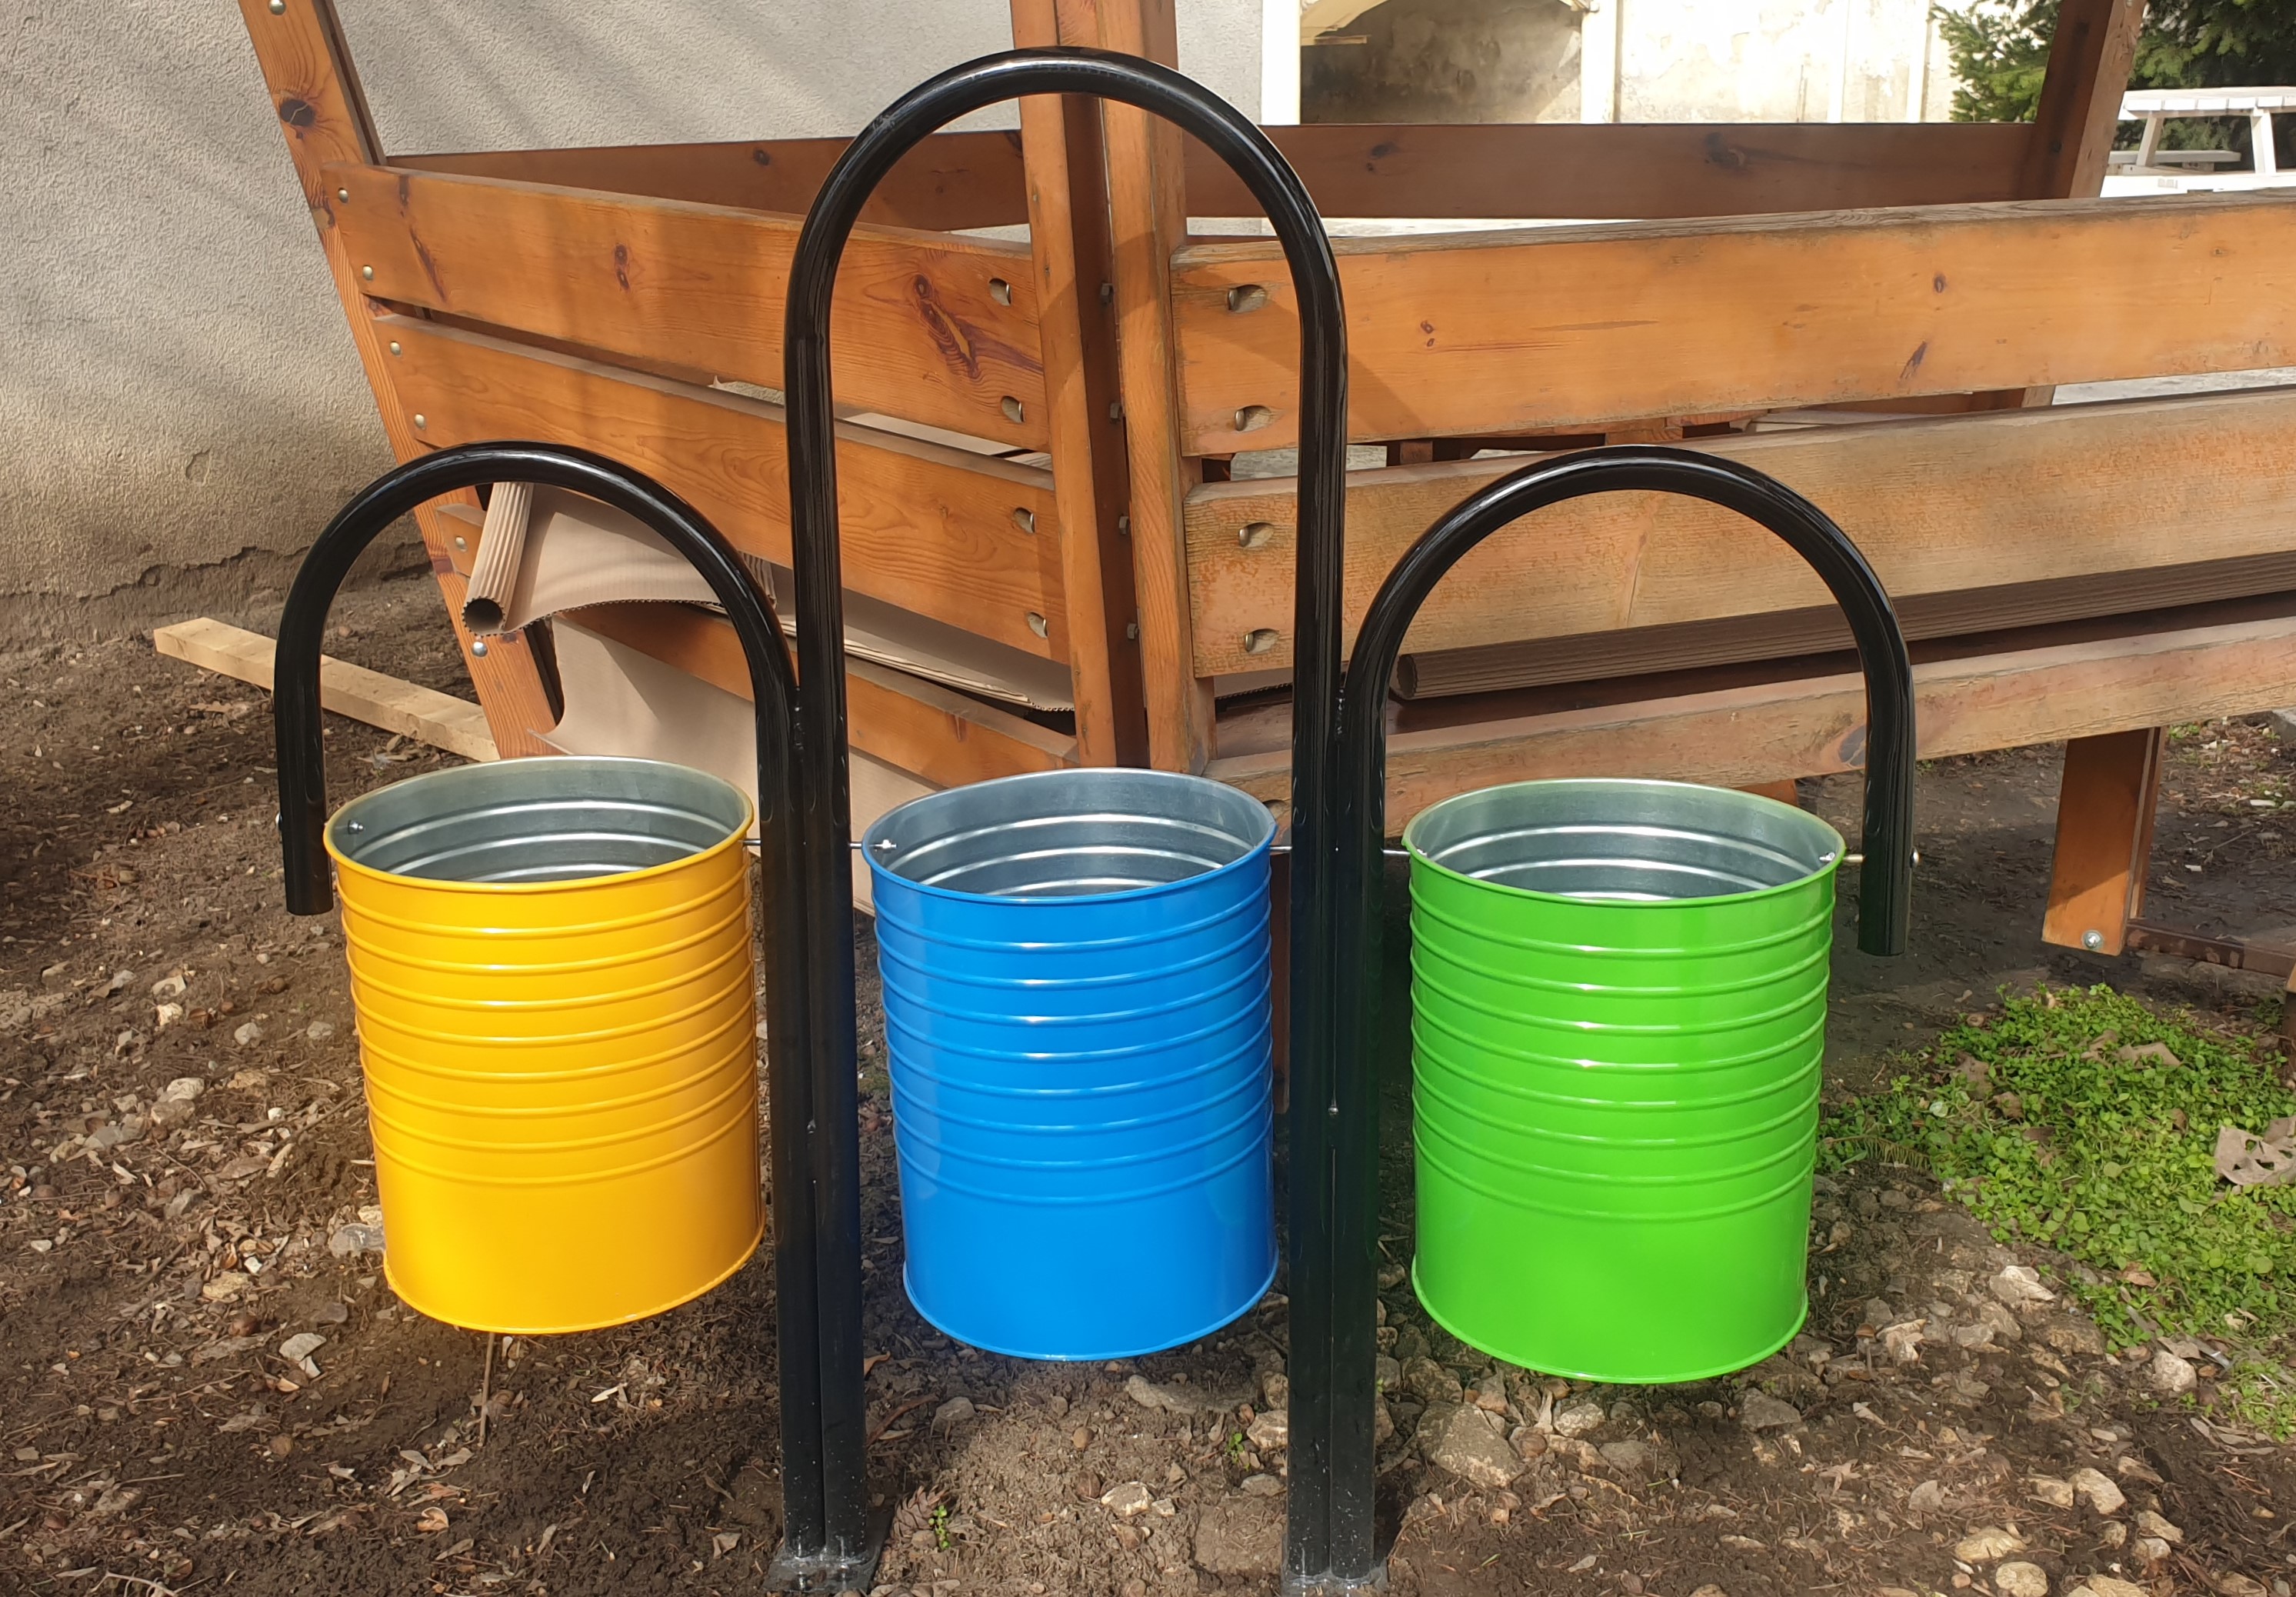 Product photo: Trash cans for waste separation, П21 model